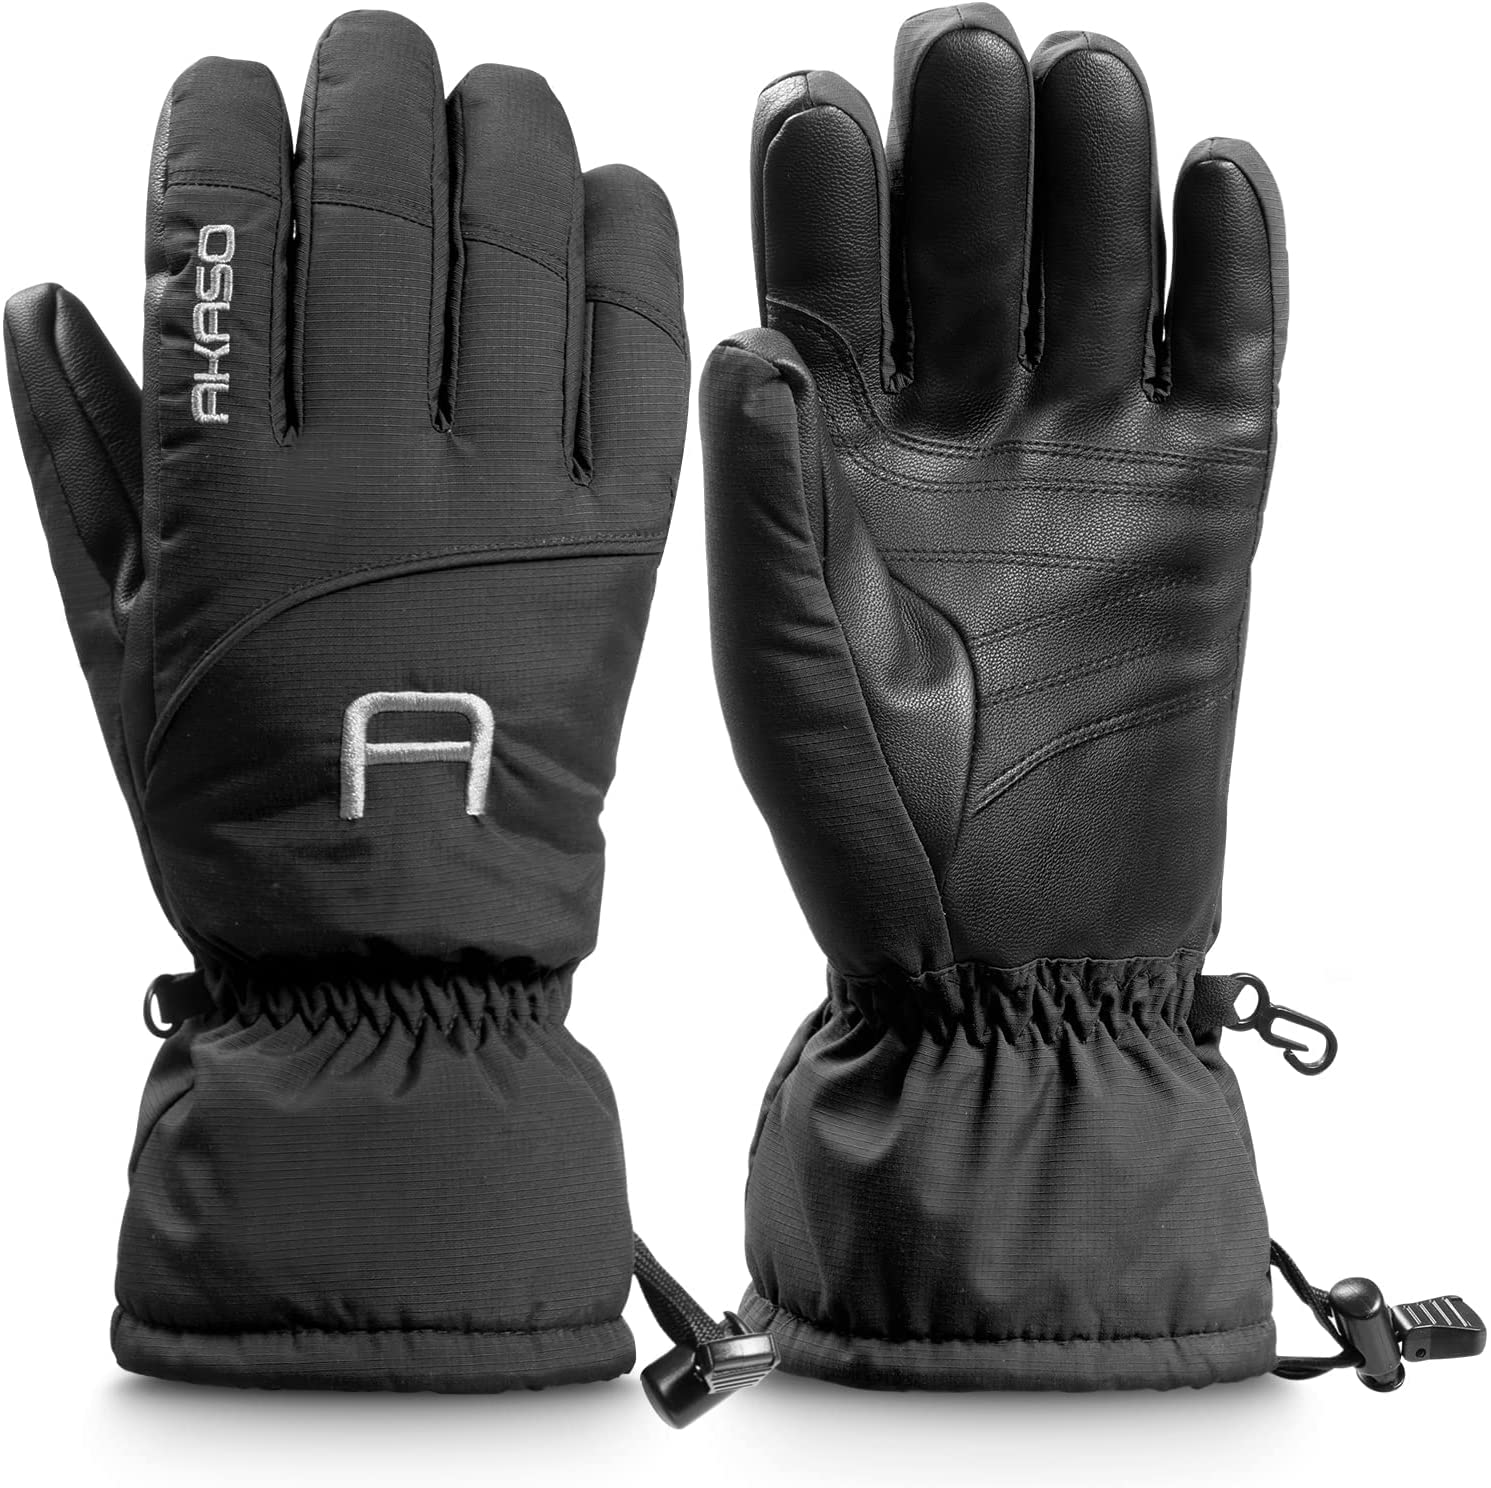 Mens 3M Thinsulate Waterproof Faux Leather Reinforced Winter Snow Gloves Size SM 